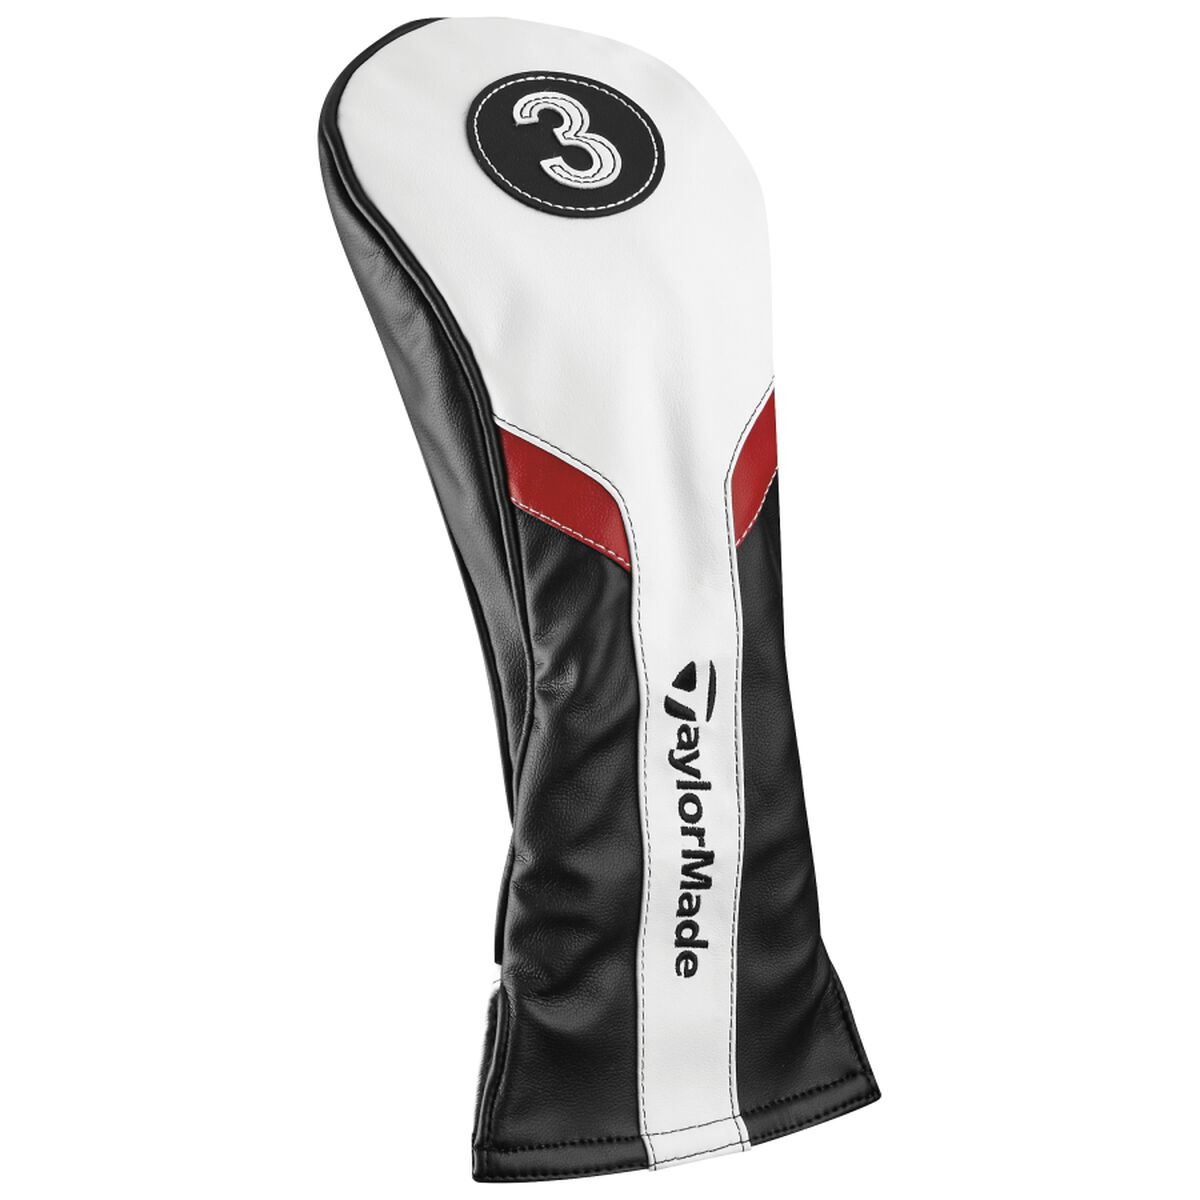 Taylormade Fairway Headcover Pga Tour Superstore 